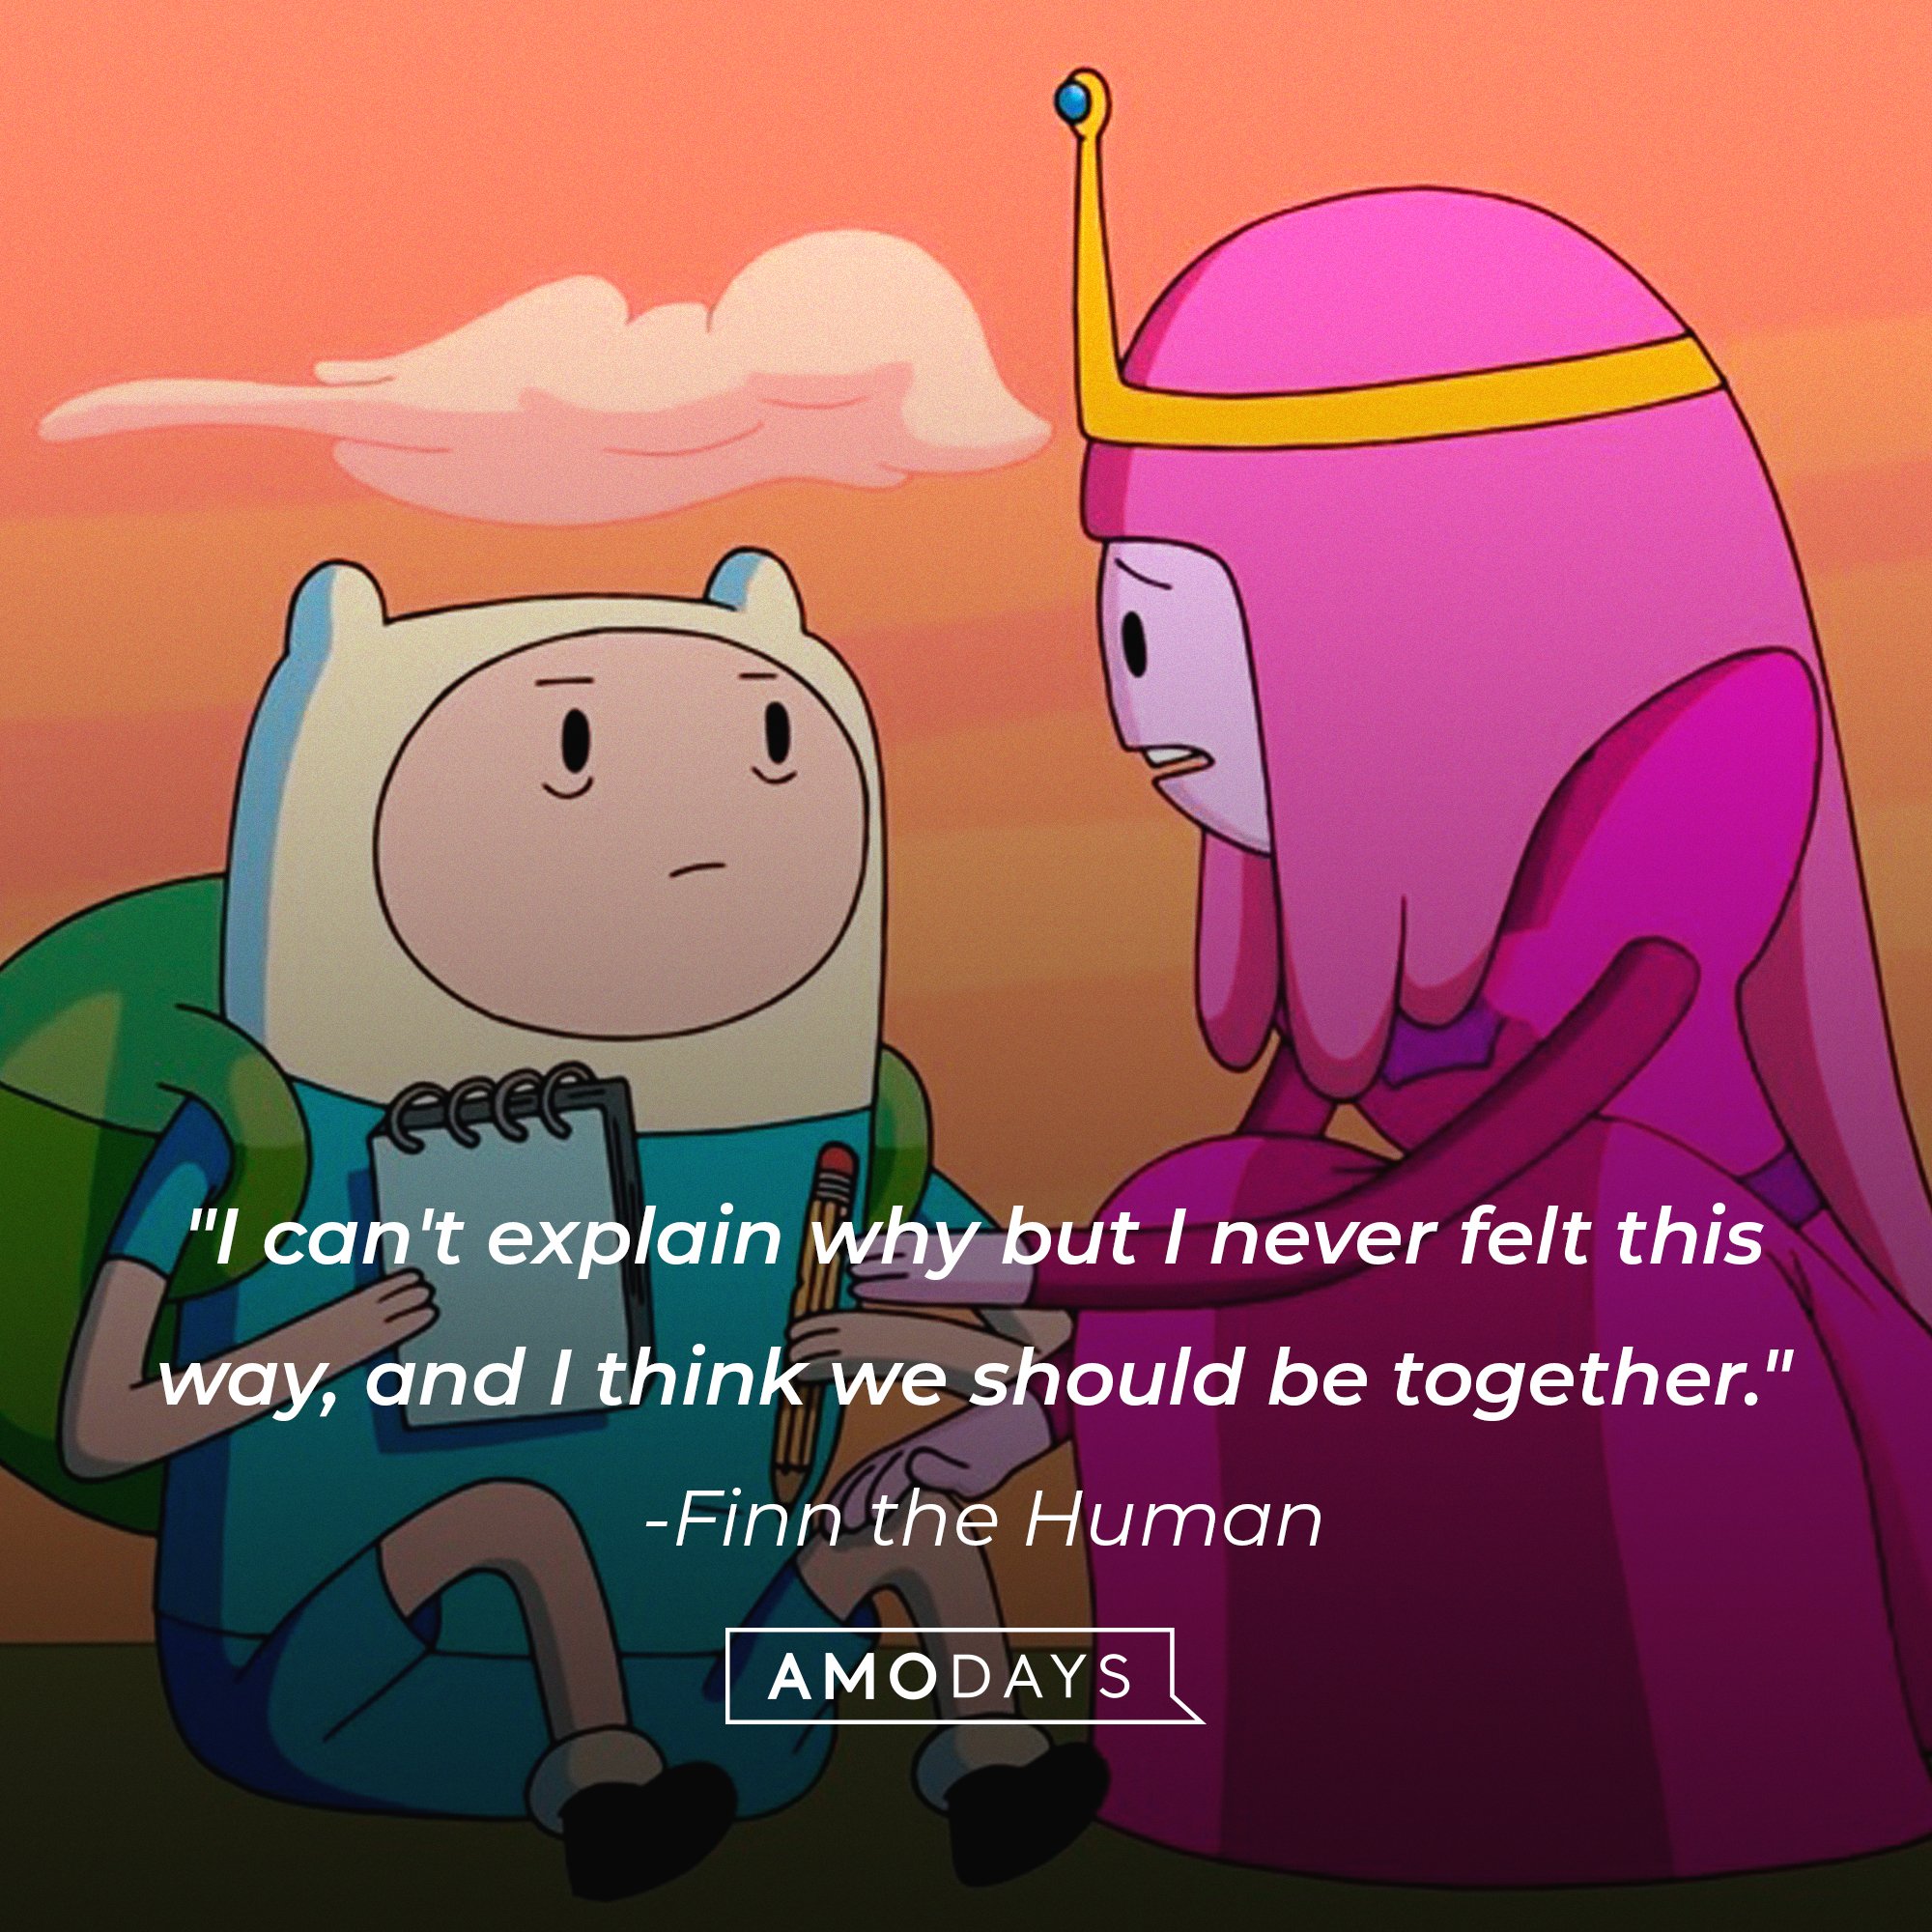   Finn the Human’s quote: “I can't explain why but I never felt this way, and I think we should be together." | Image: AmoDays